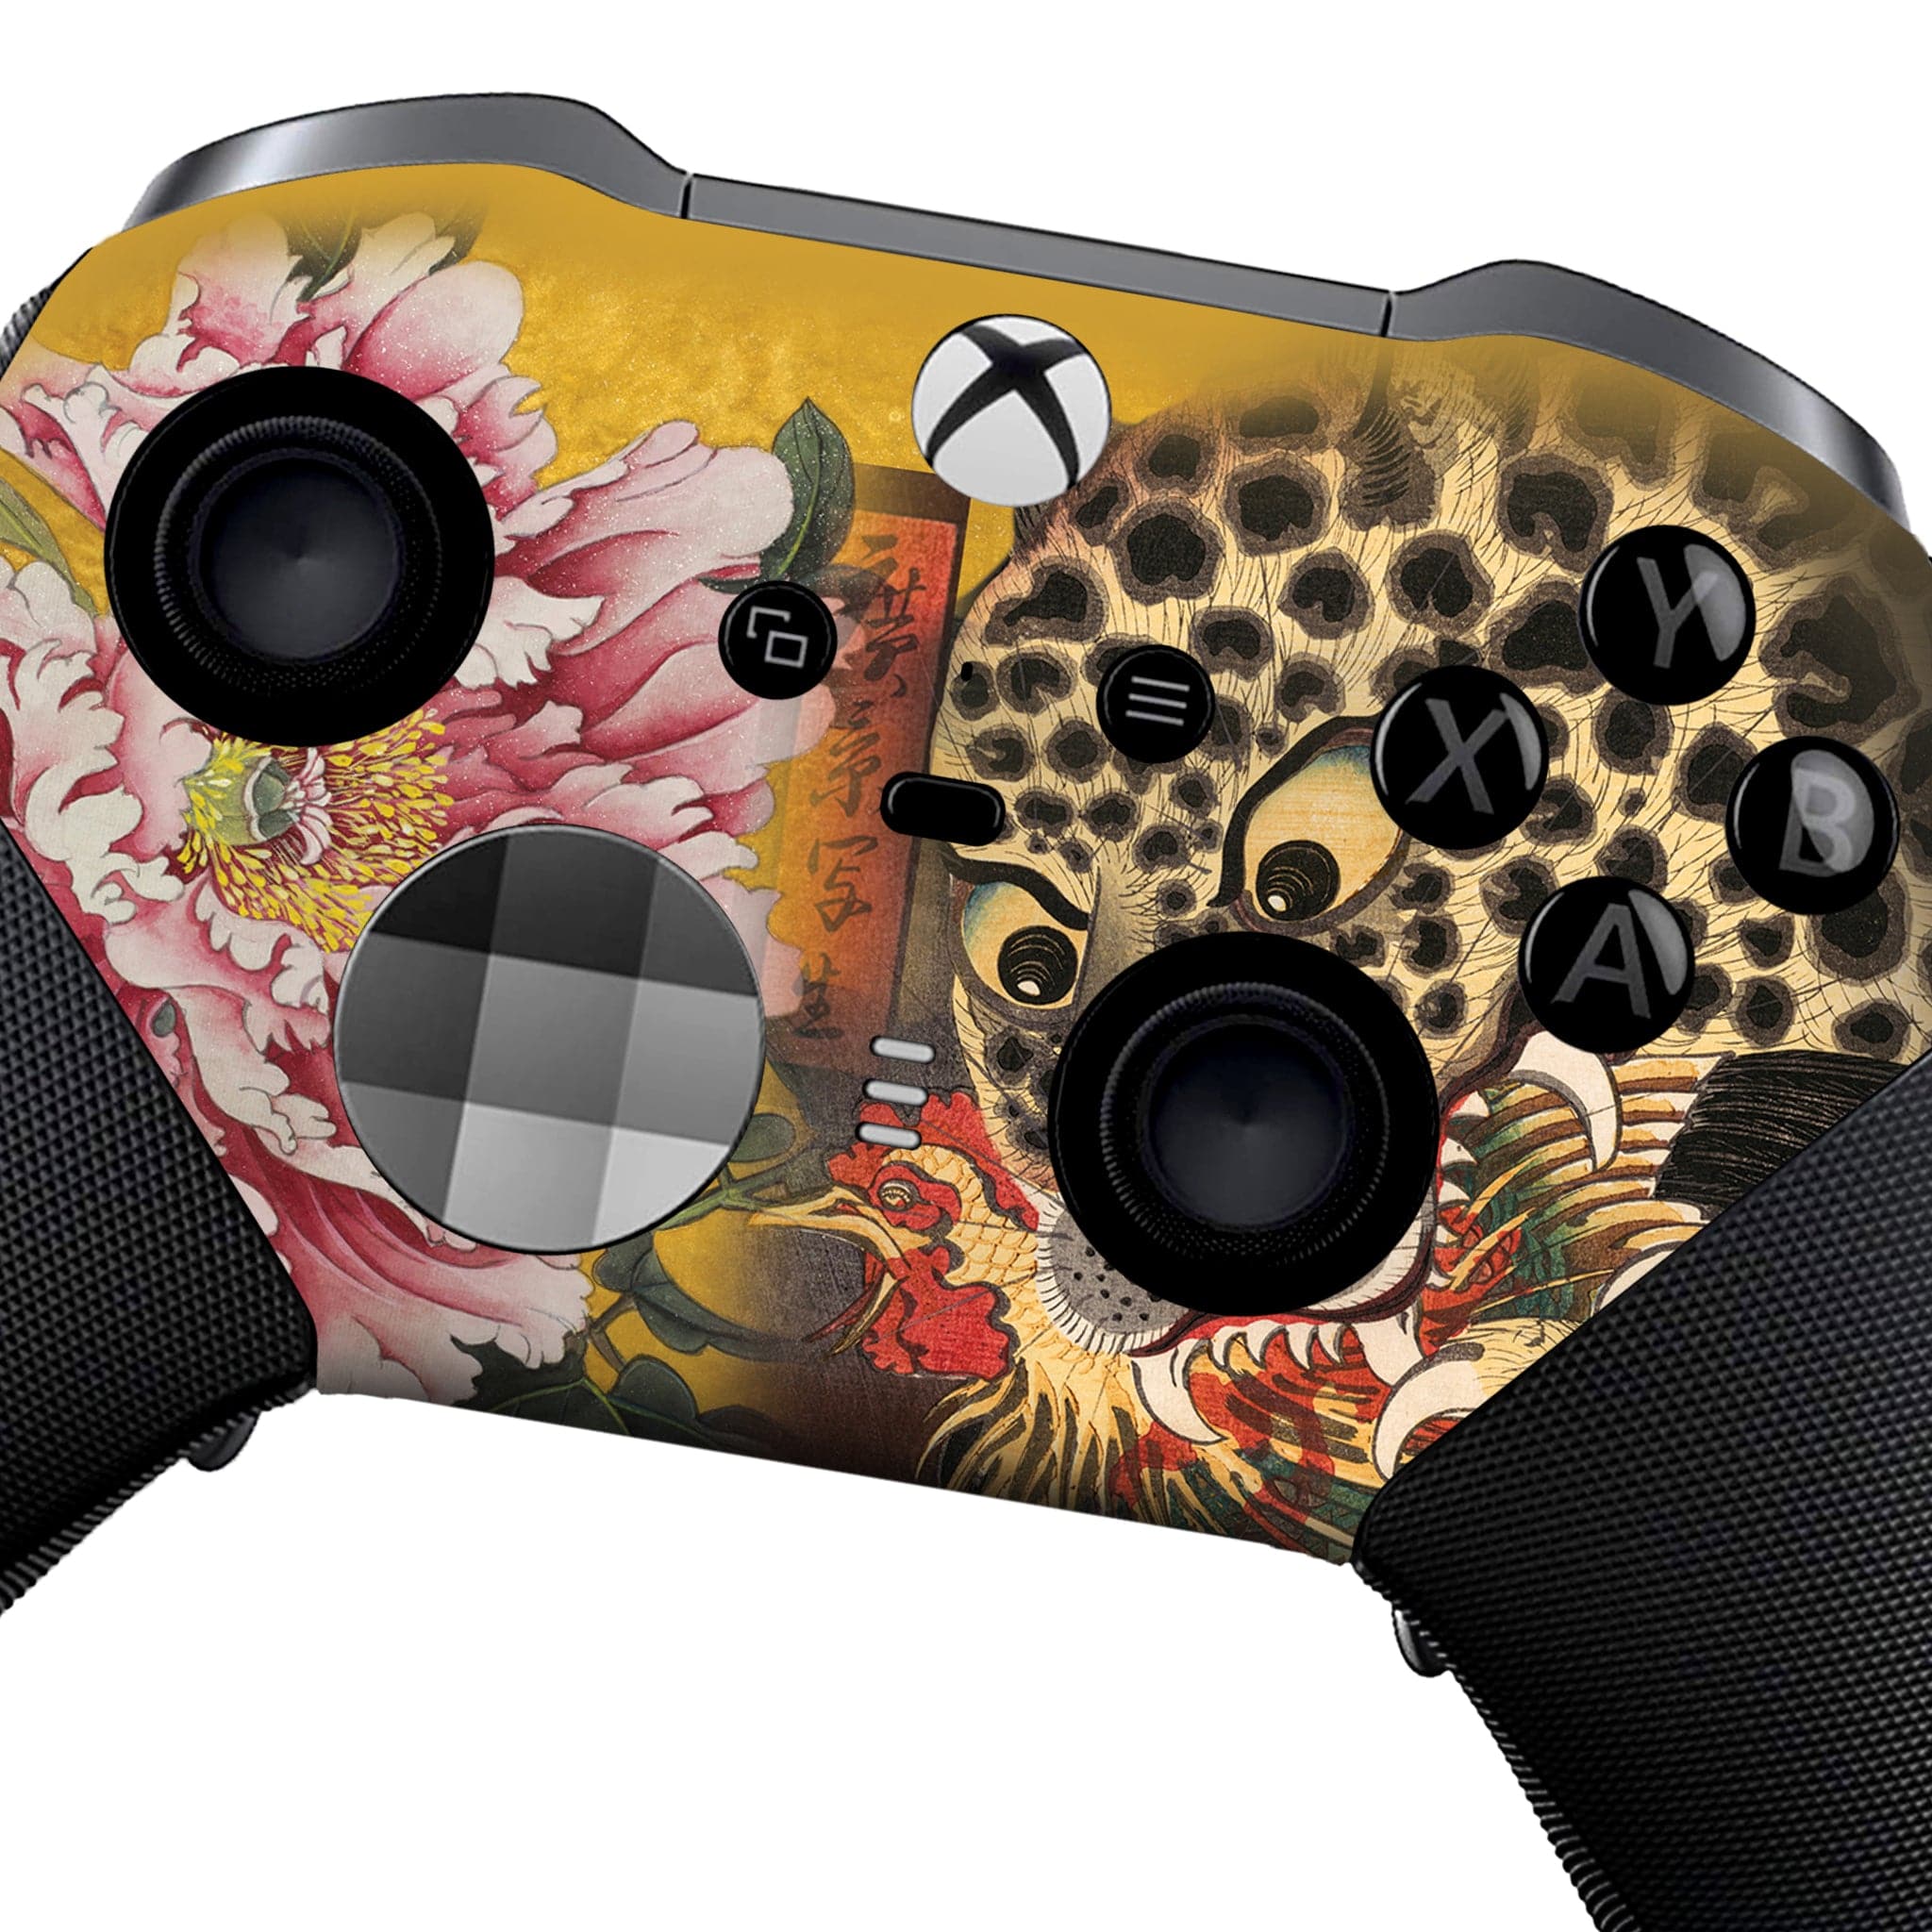 Chinese Leopard Xbox Elite Series 2 Controller - Dream Controller